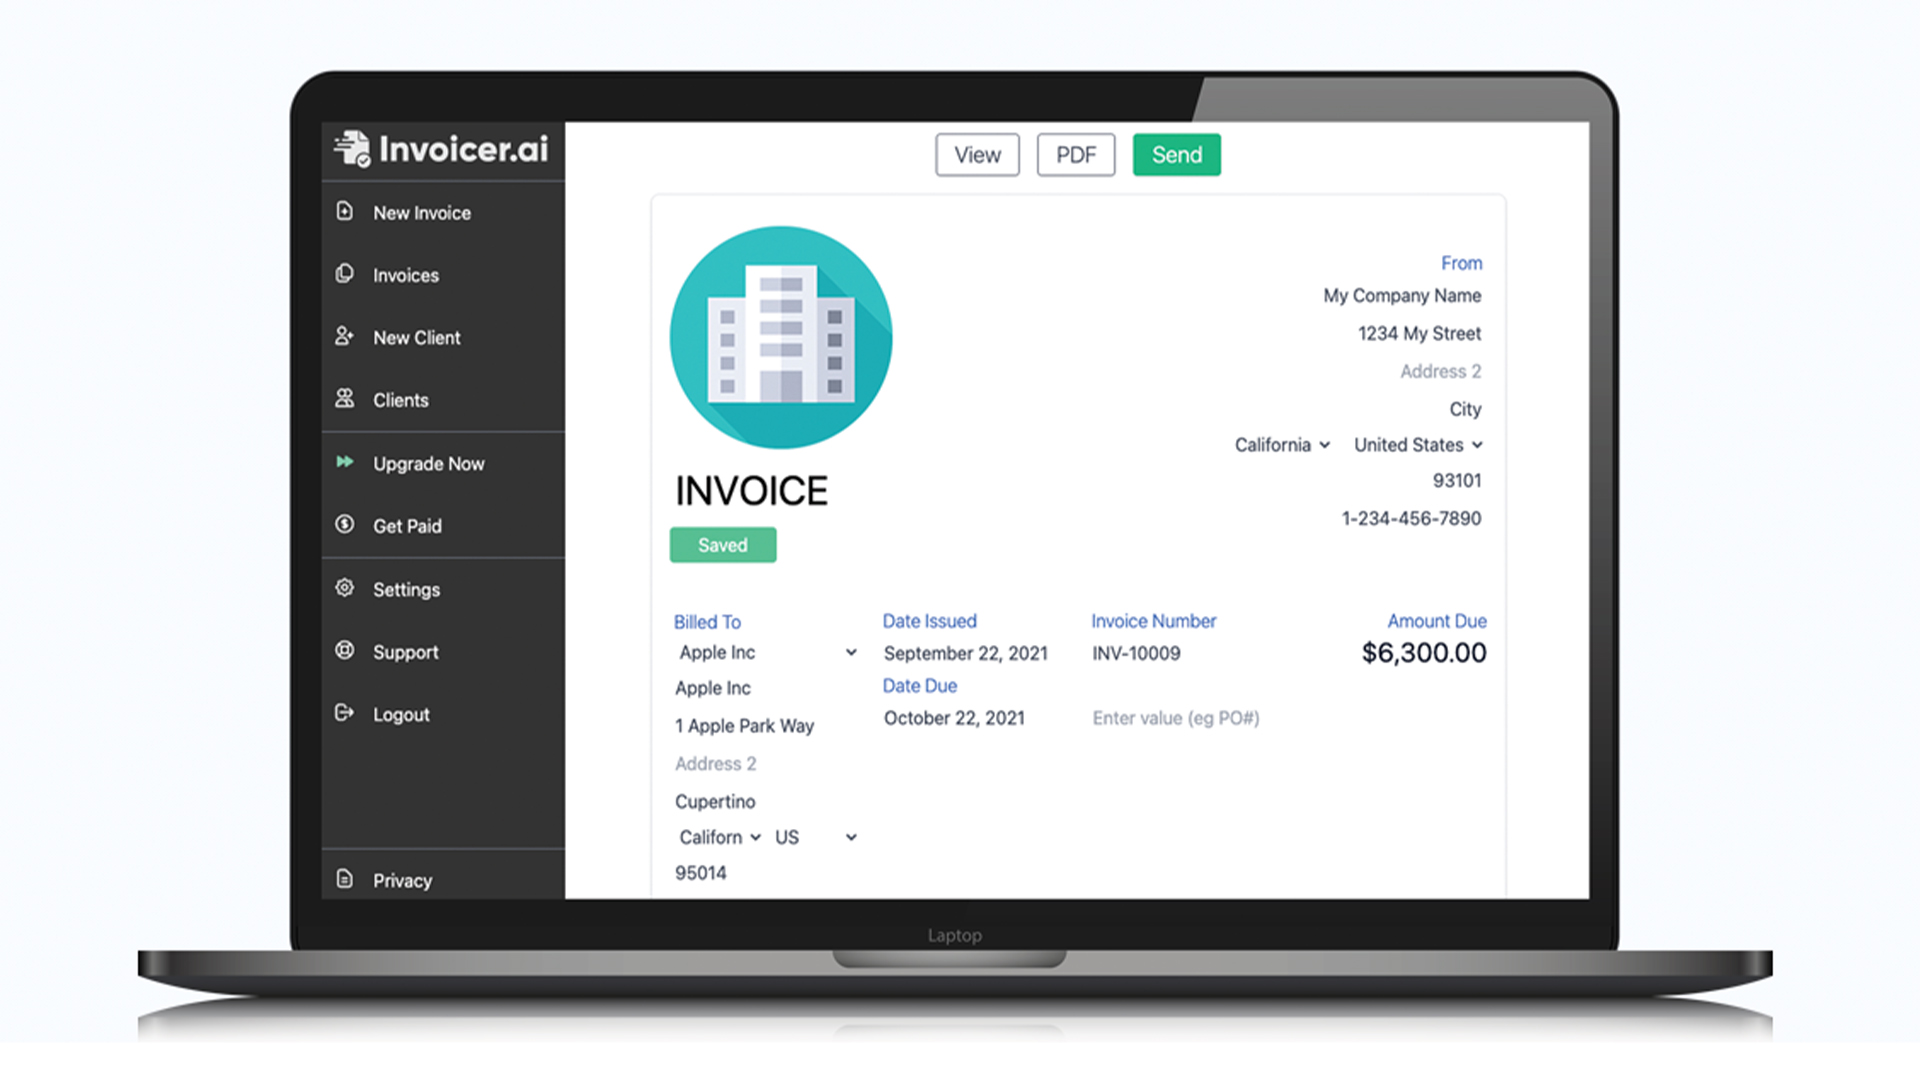 Customize invoices by choosing the color scheme and adding a company logo.